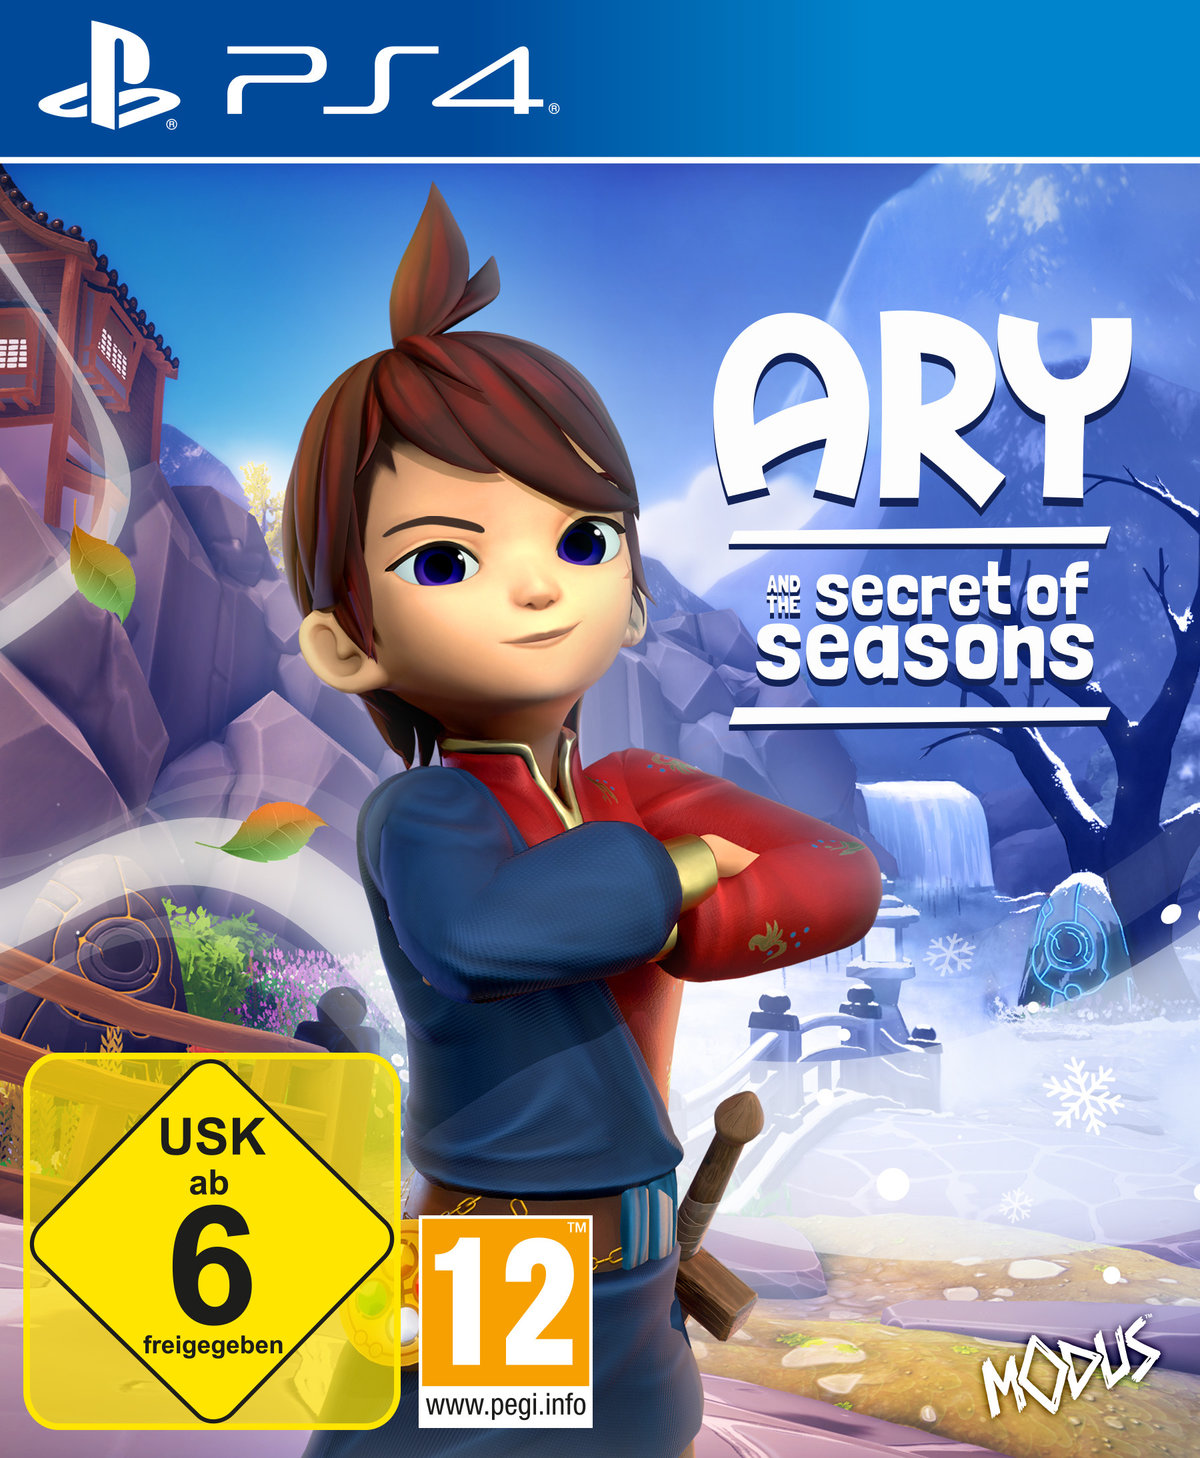 Seasons PS-4 4] the of - [PlayStation Ary Secret and